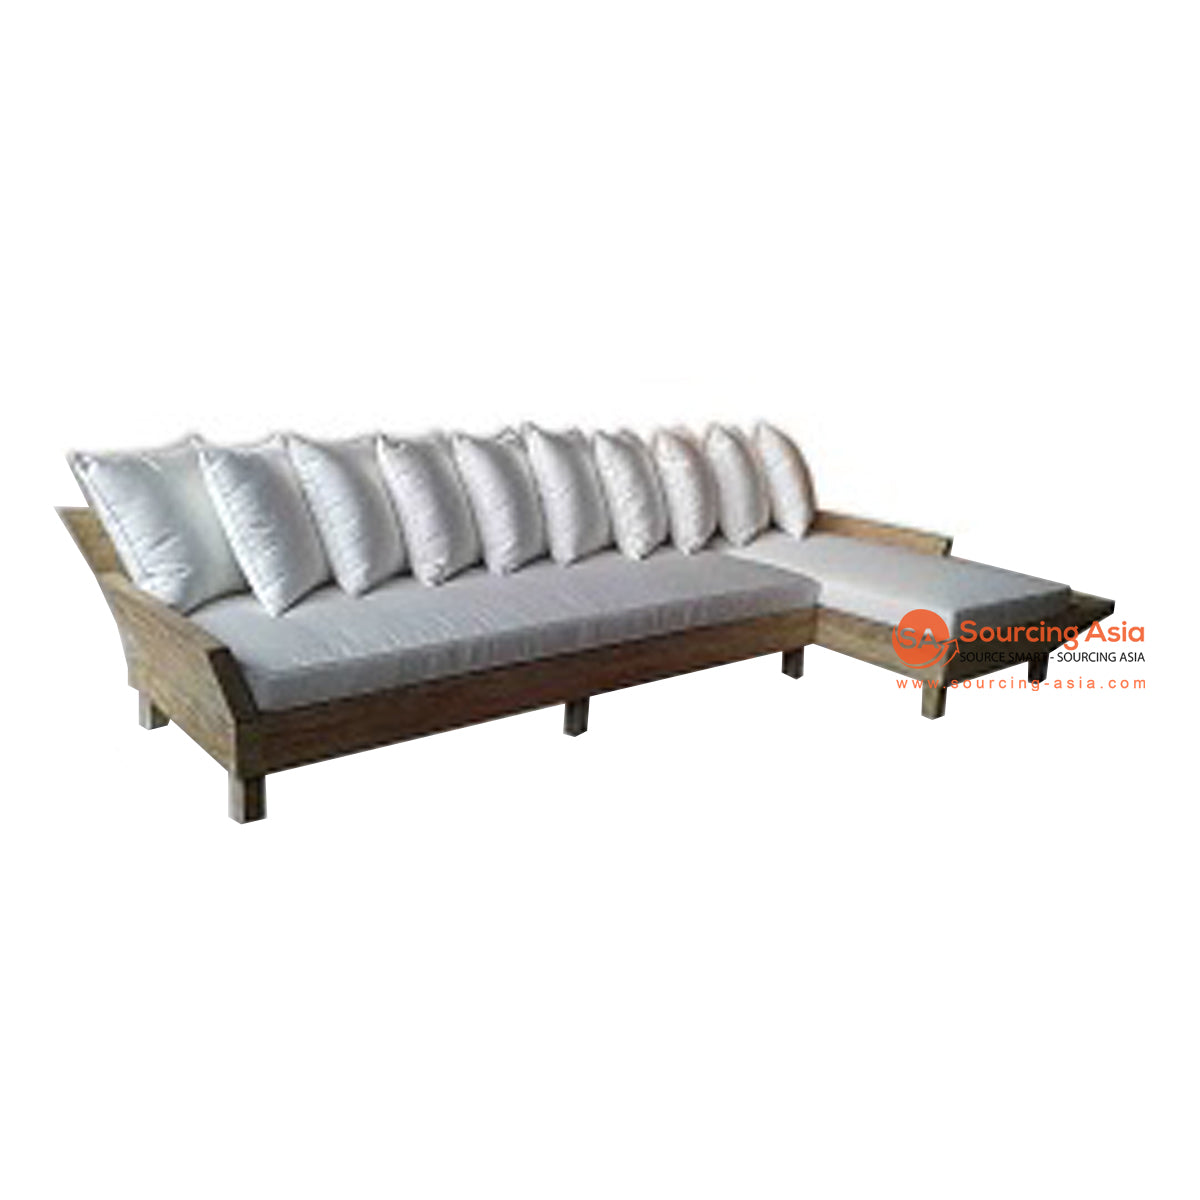 ECL078 NATURAL RECYCLED TEAK WOOD LOW CORNER LOUNGER SOFA (PRICE WITHOUT CUSHION)